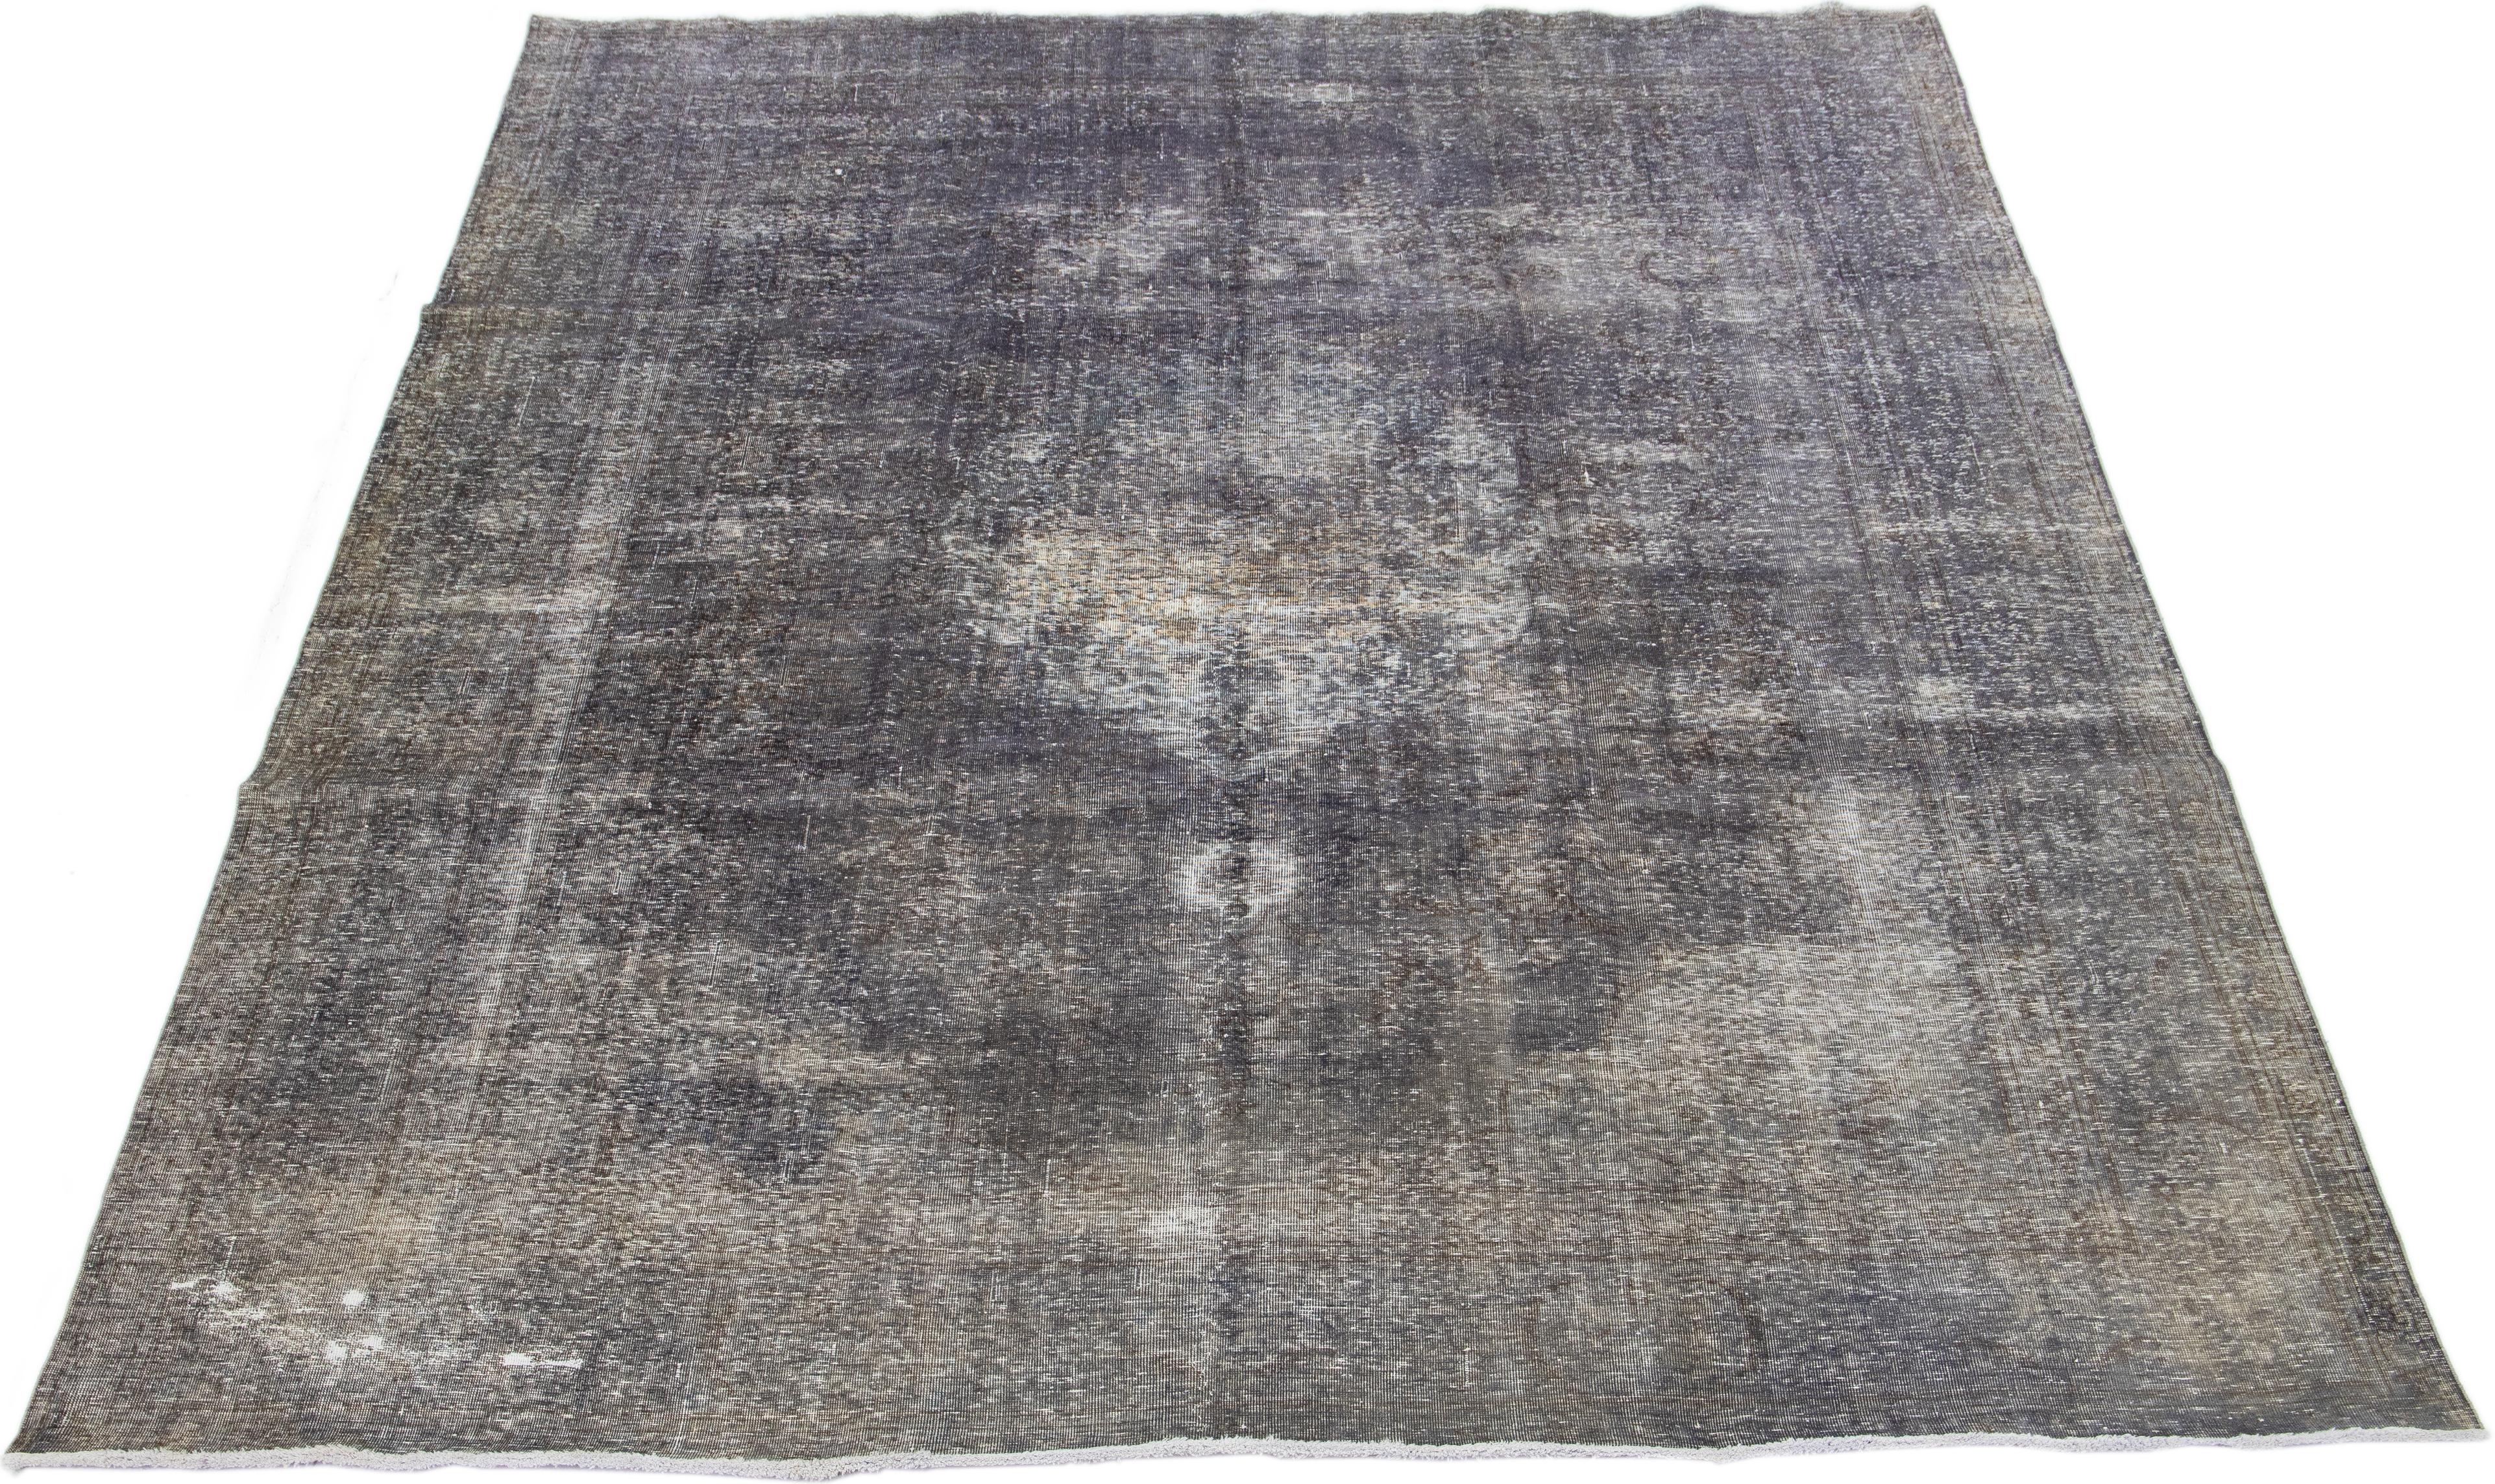 This Persian rug, originating from the 1960s, features an intricate floral design in shades of brown that has been intentionally distressed and dyed, resulting in a delightful rustic aesthetic. The rug's exceptional gray color exudes an aura of